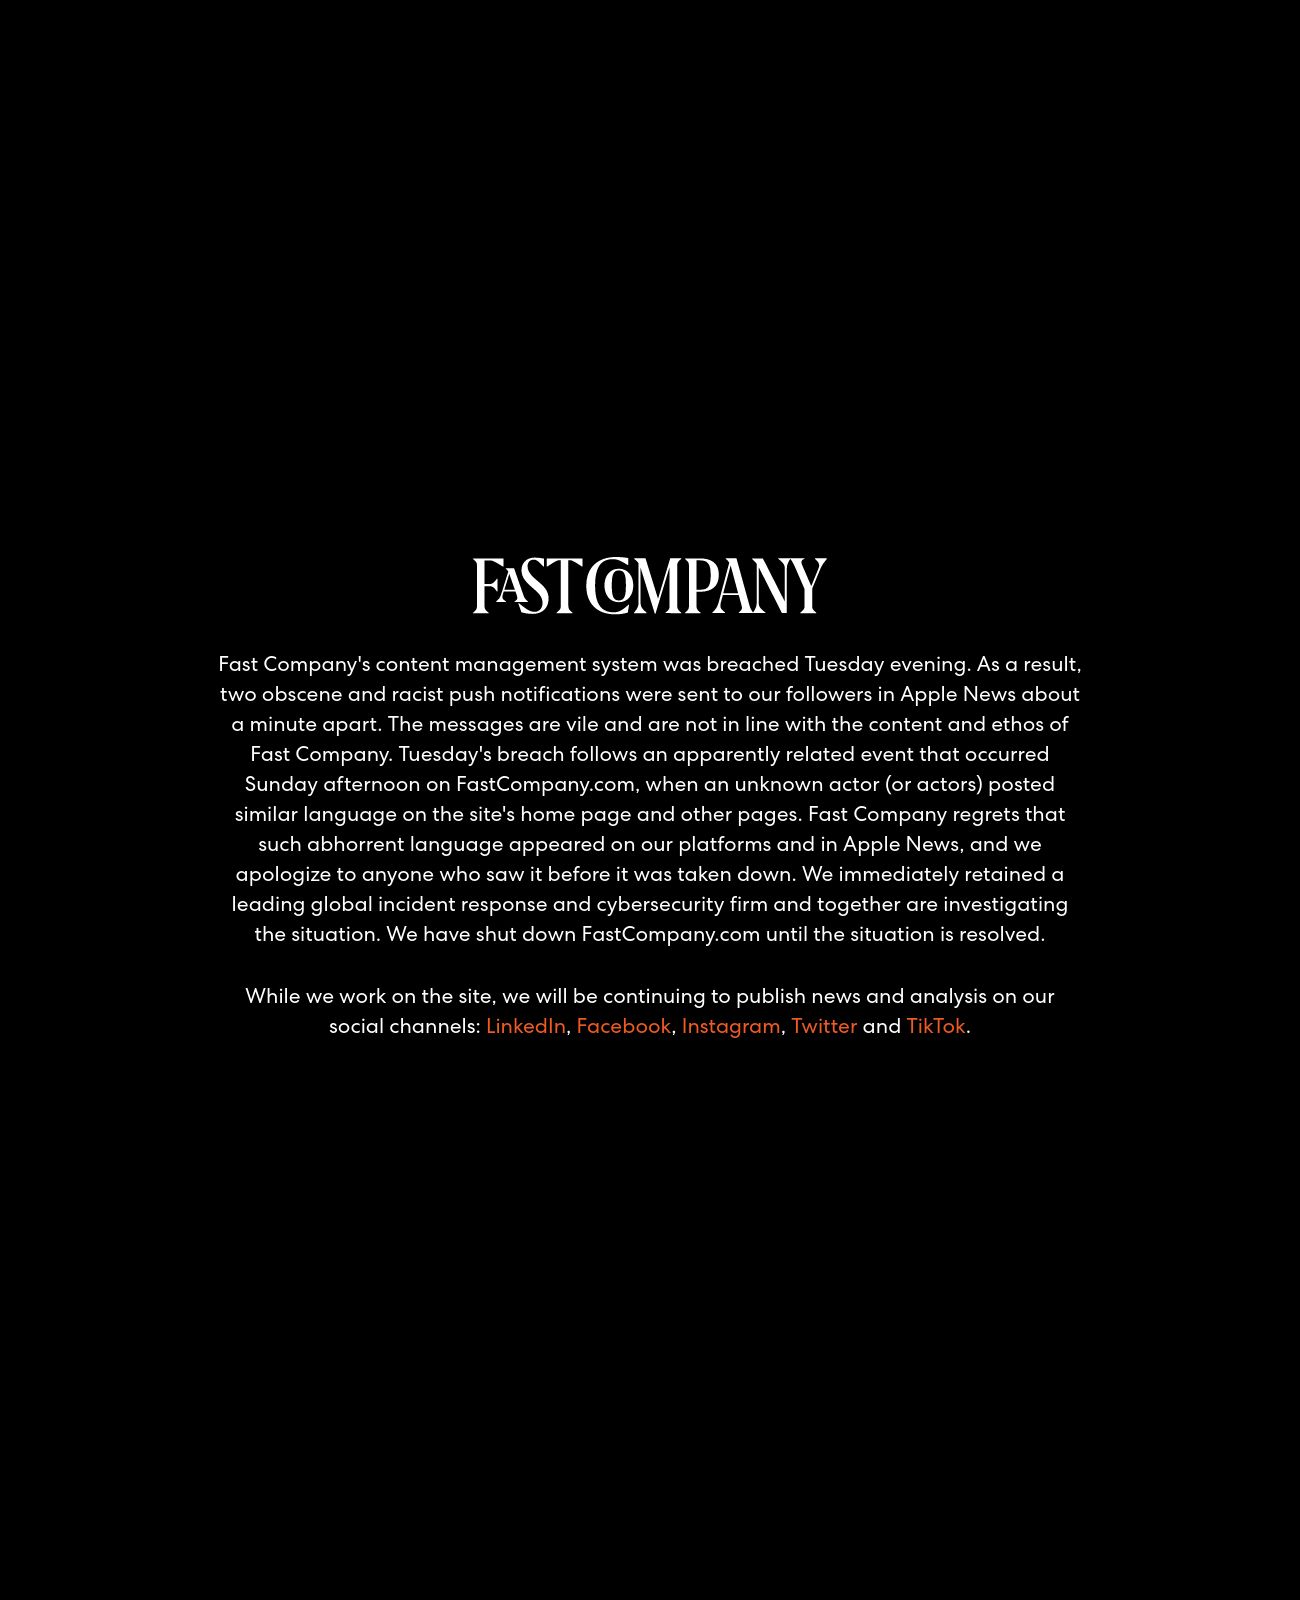 Fast Company at 2022-09-30 14:27:54-04:00 local time